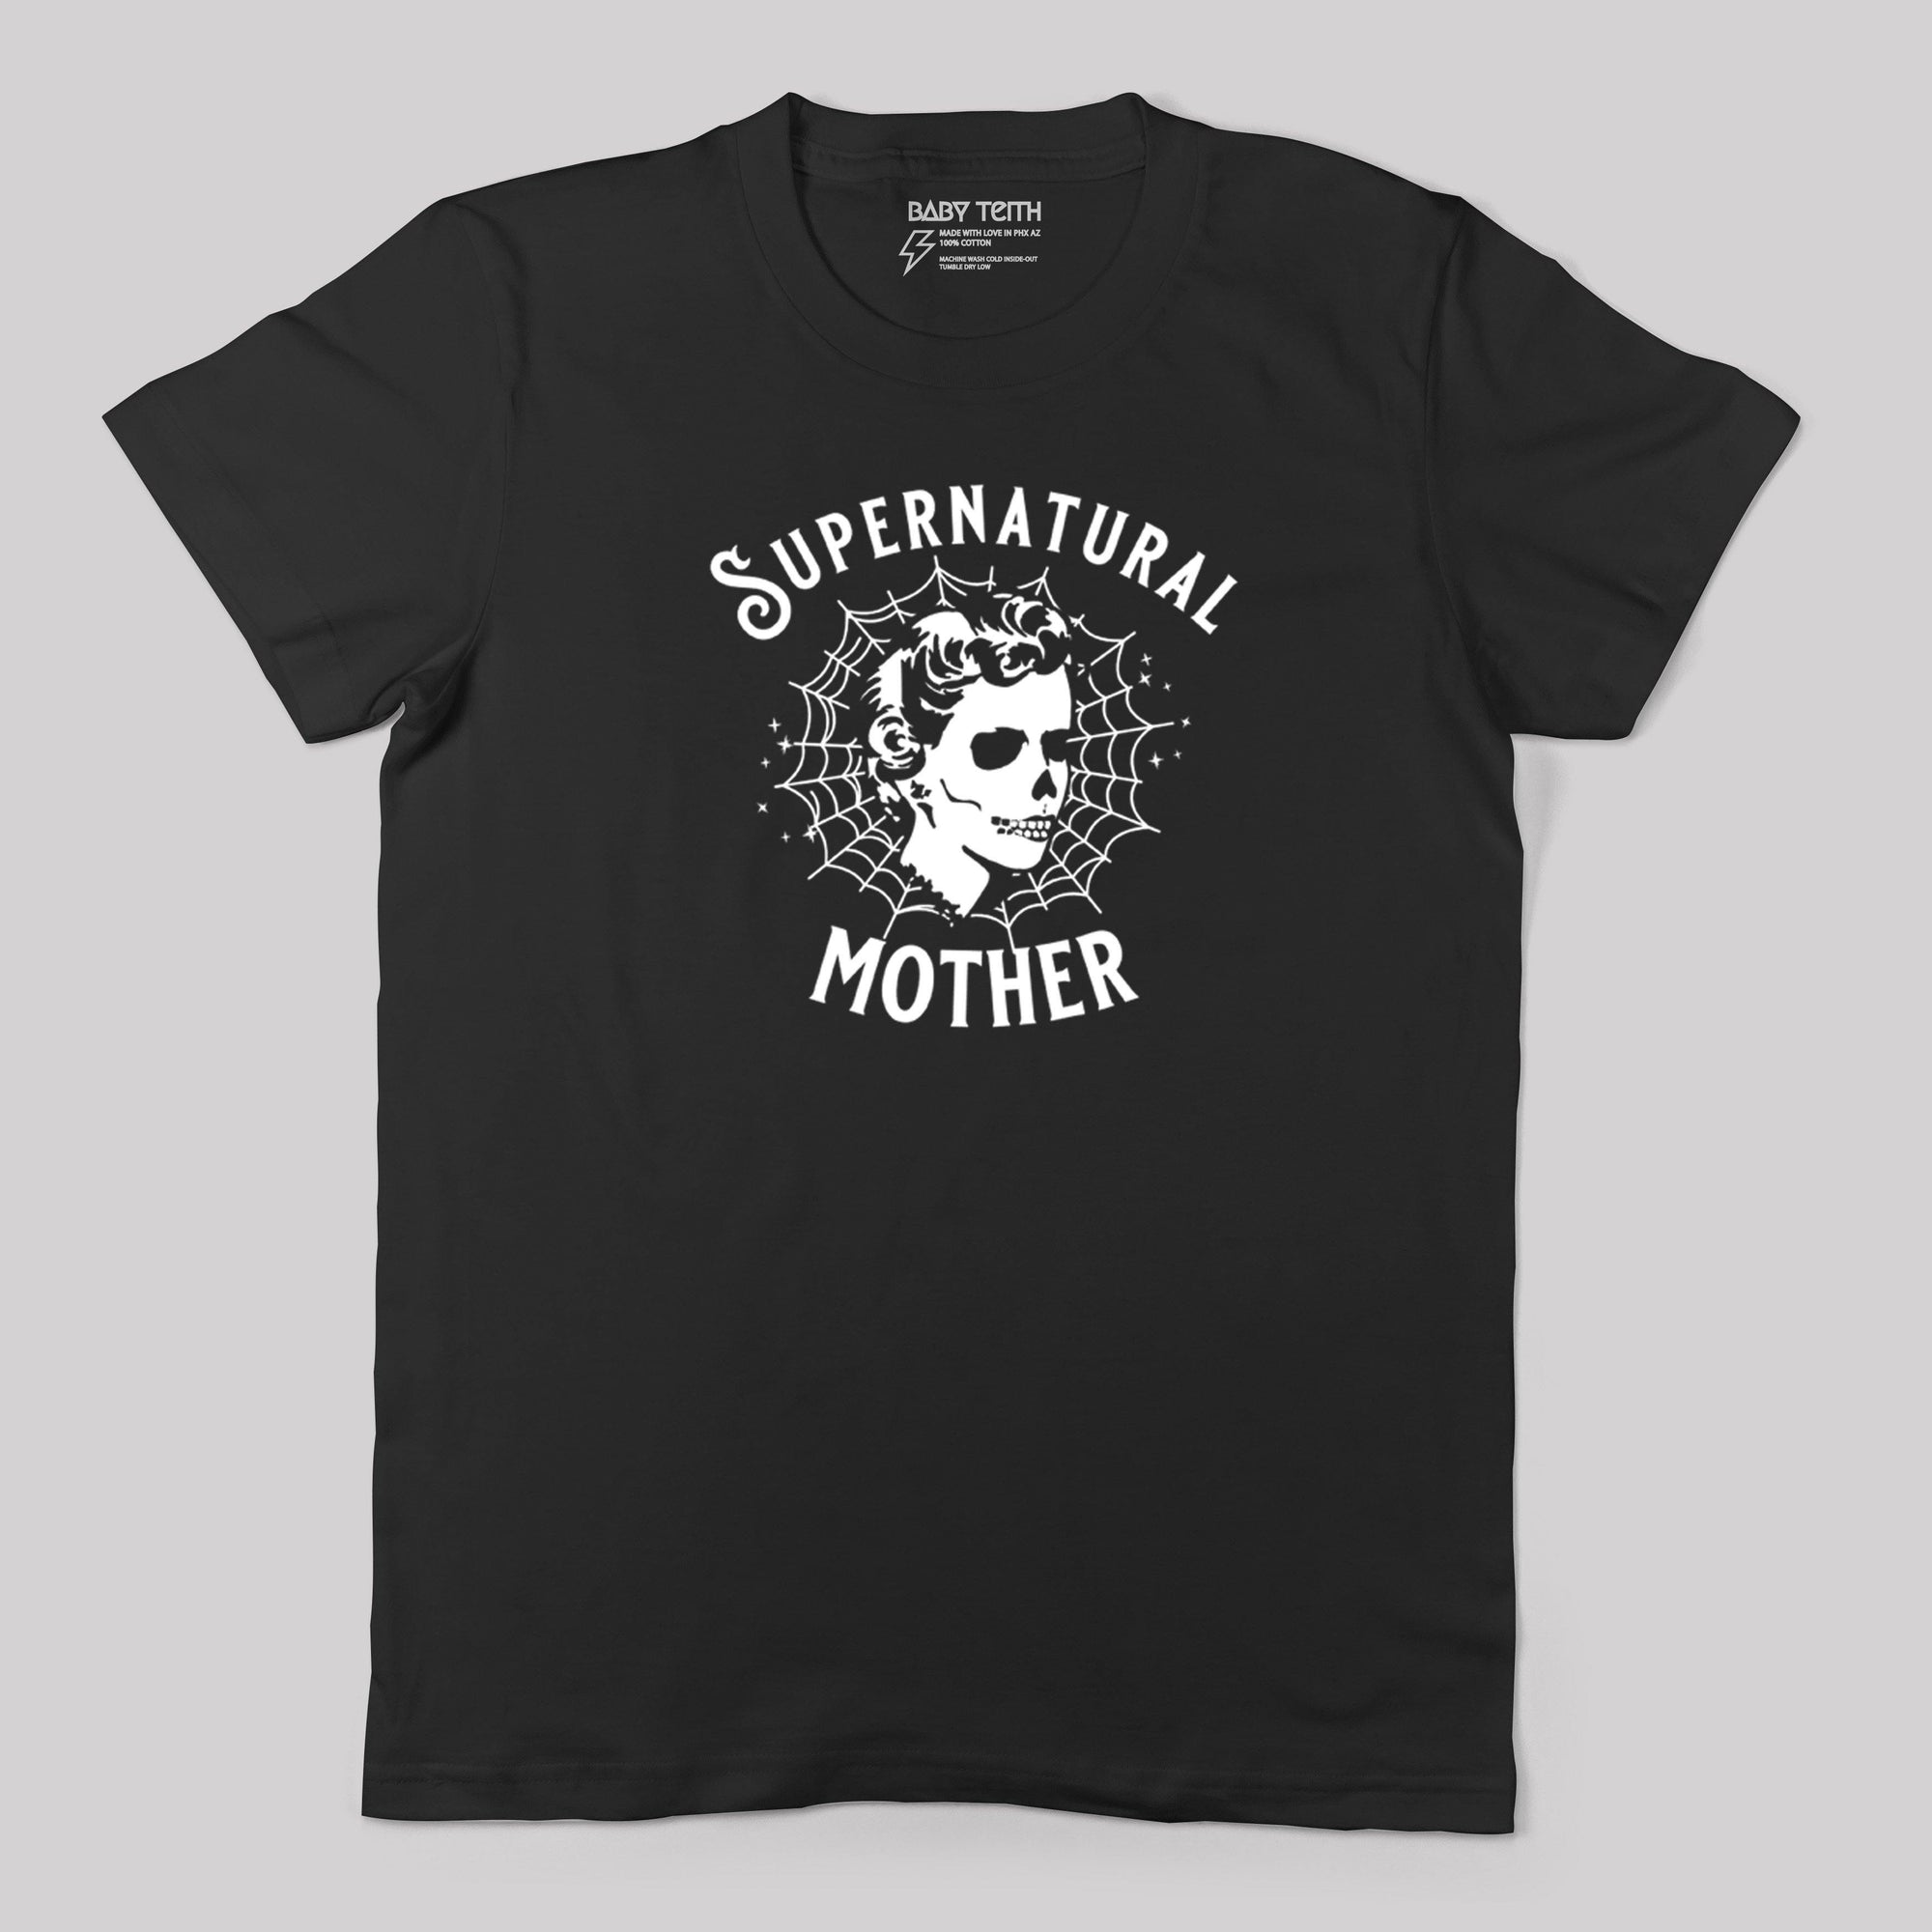 Supernatural Mother Tee - Baby Teith